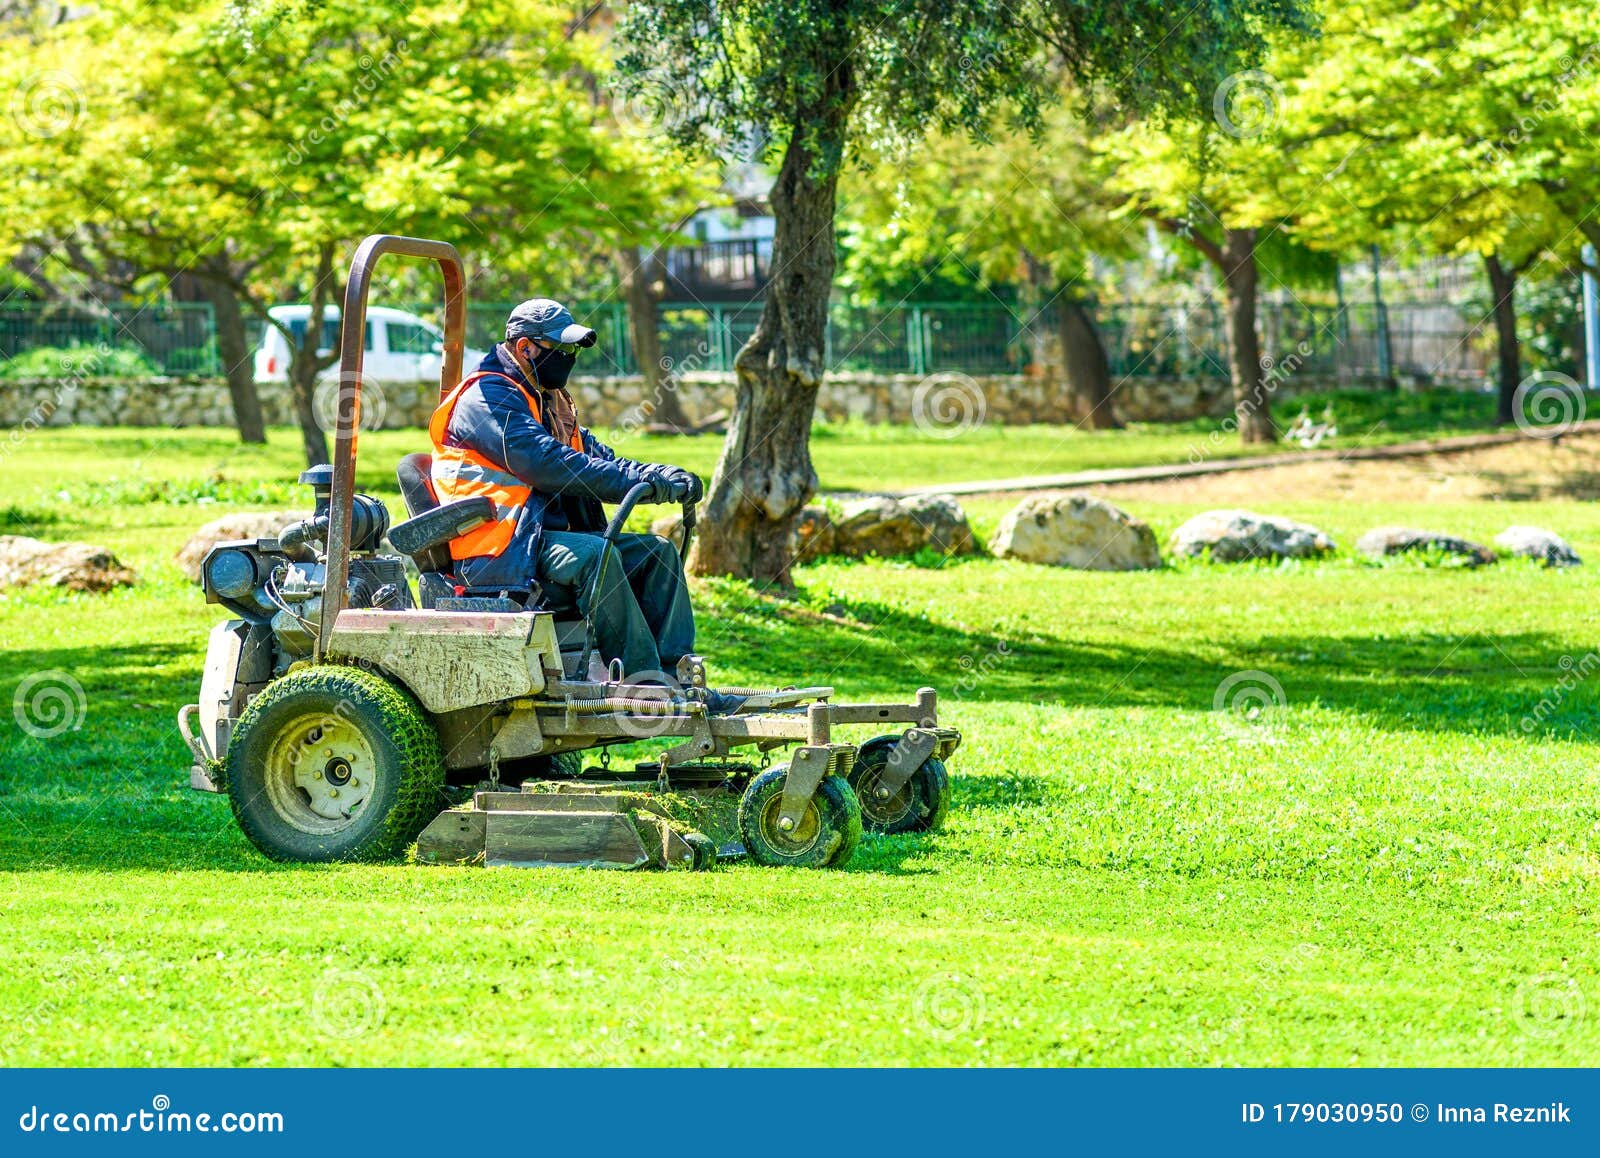 Man Wearing Black Face Mask Mows the Grass with Lawn Mower. Mow